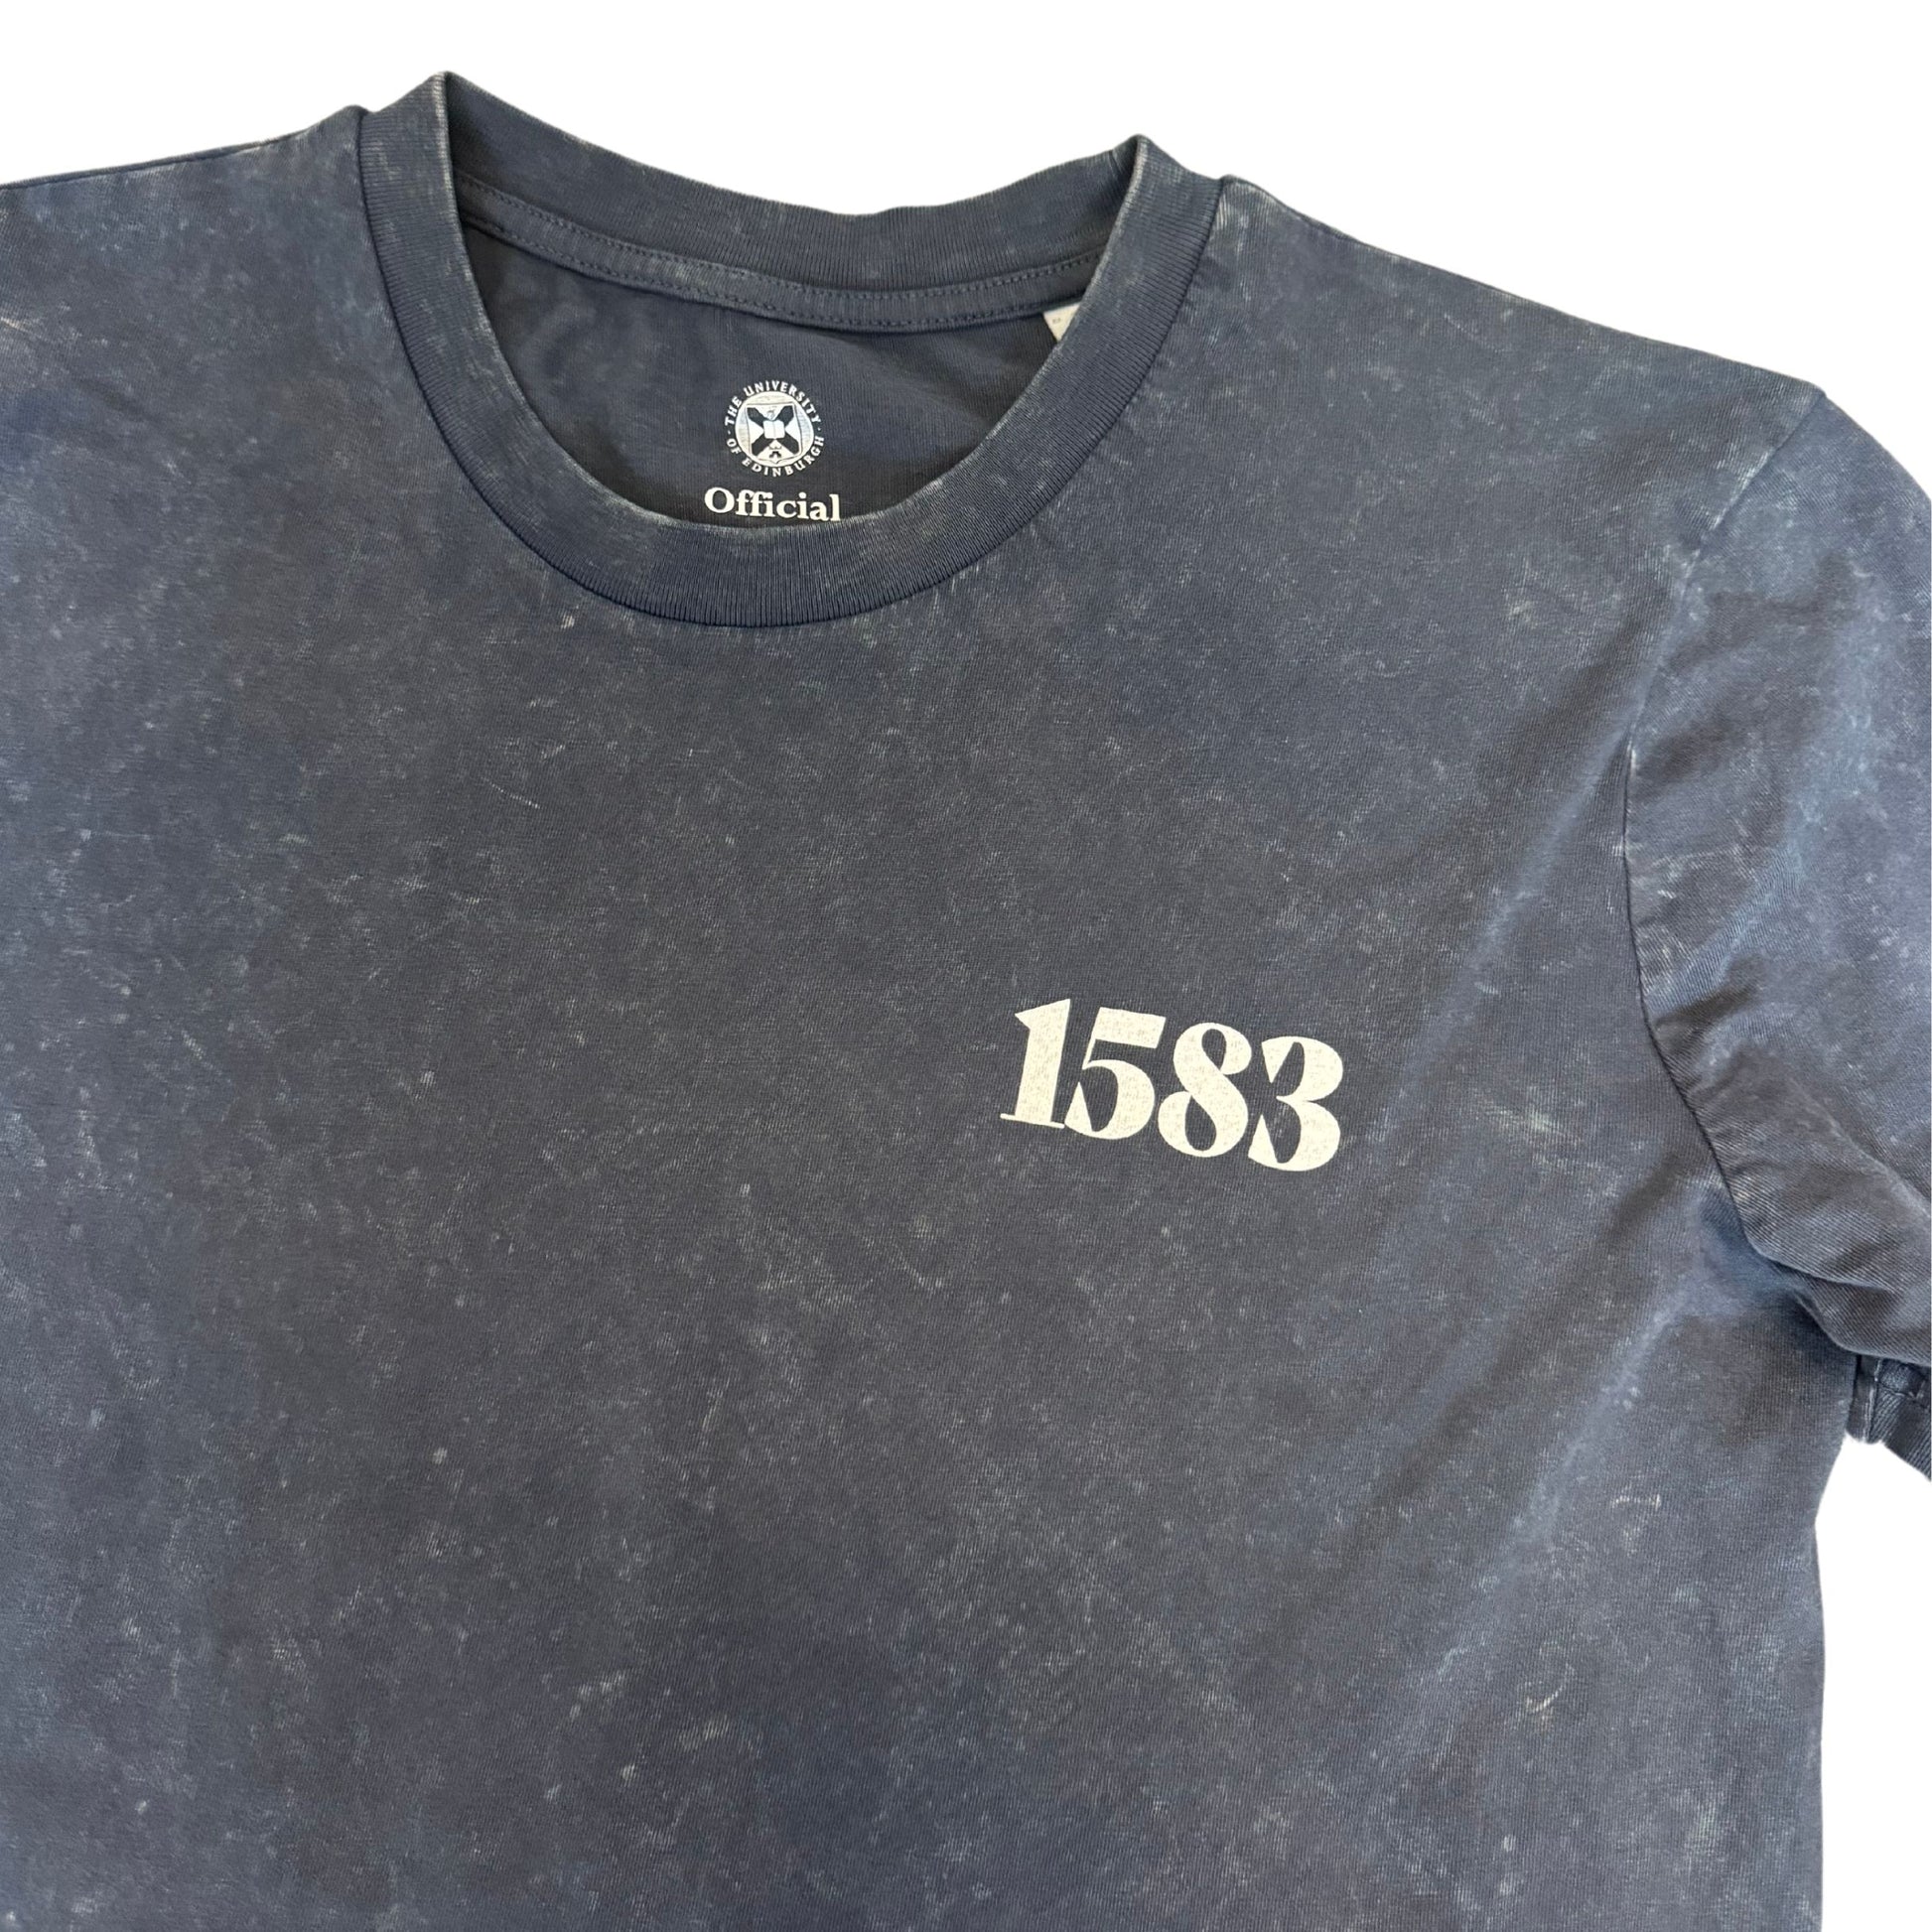 A close up of the distressed vintage t shirt showcasing the bubble text printed on the left chest, which says '1583' in a white bubble font.